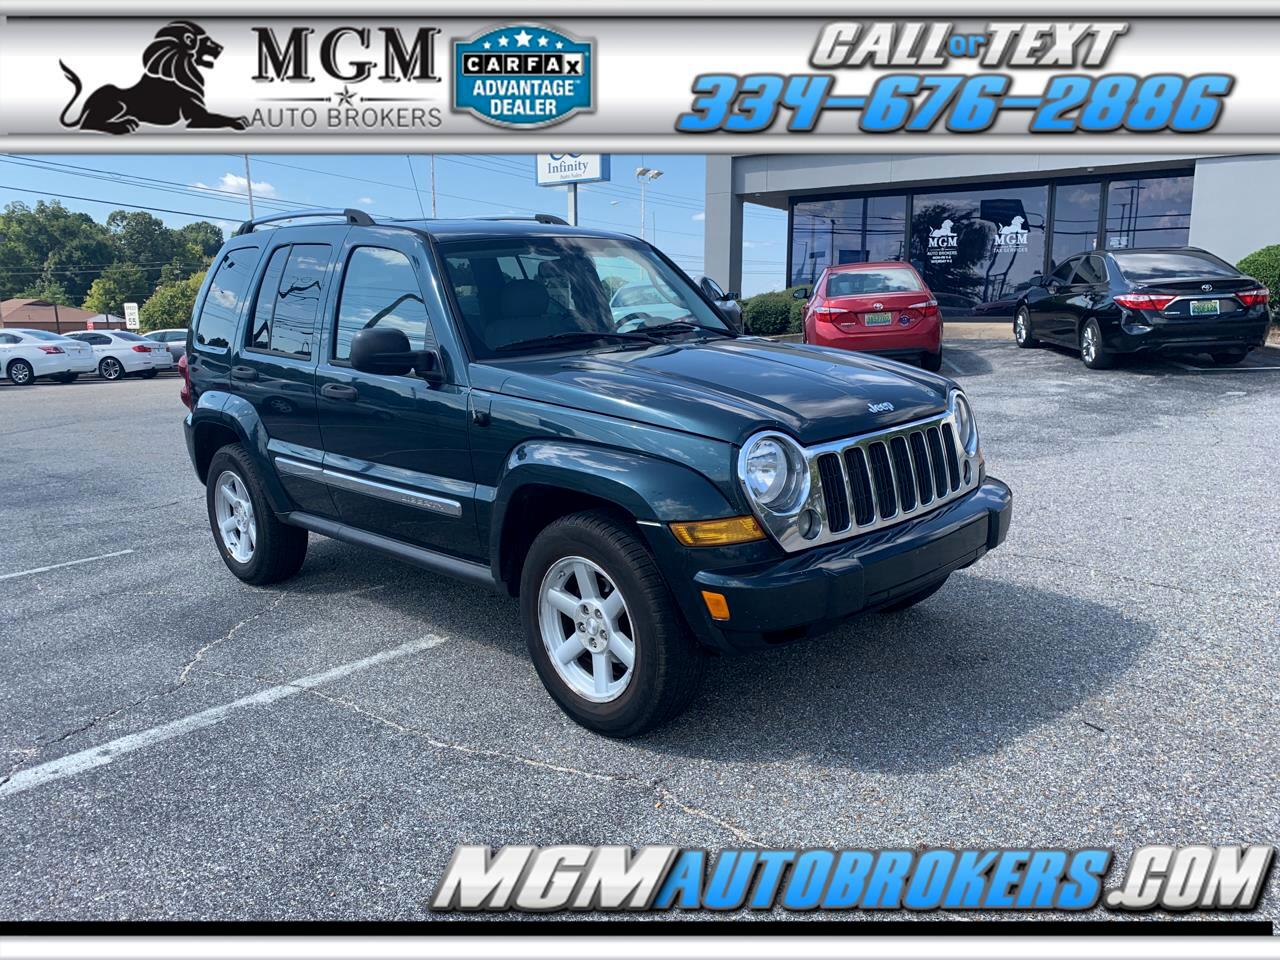 Used 2006 Jeep Liberty Limited 4wd For Sale In Montgomery Al